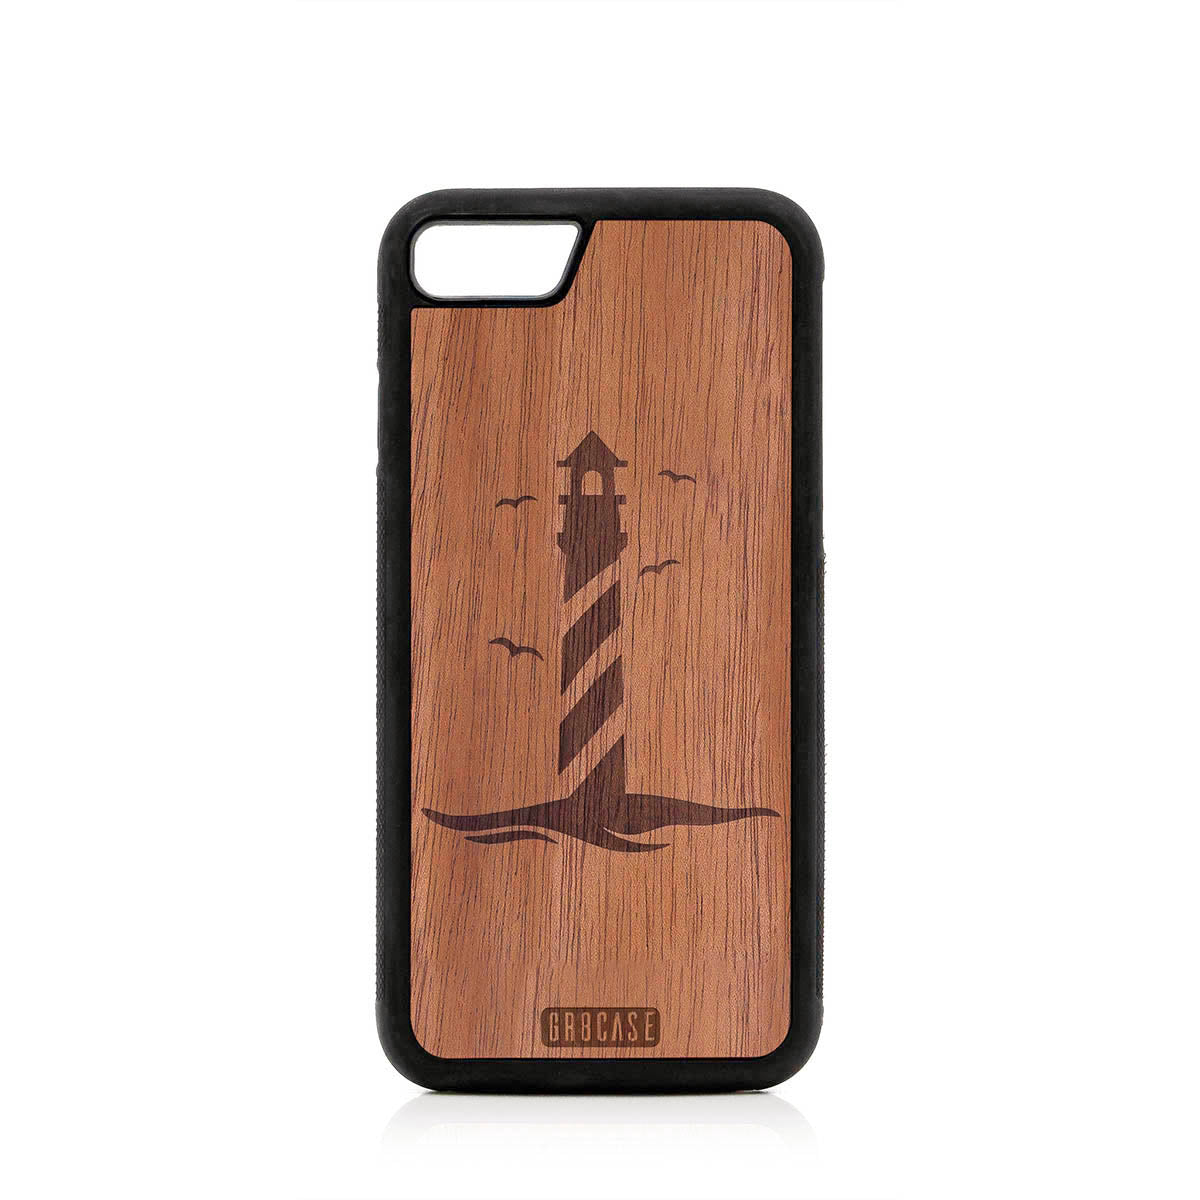 Lighthouse Design Wood Case For iPhone 7/8